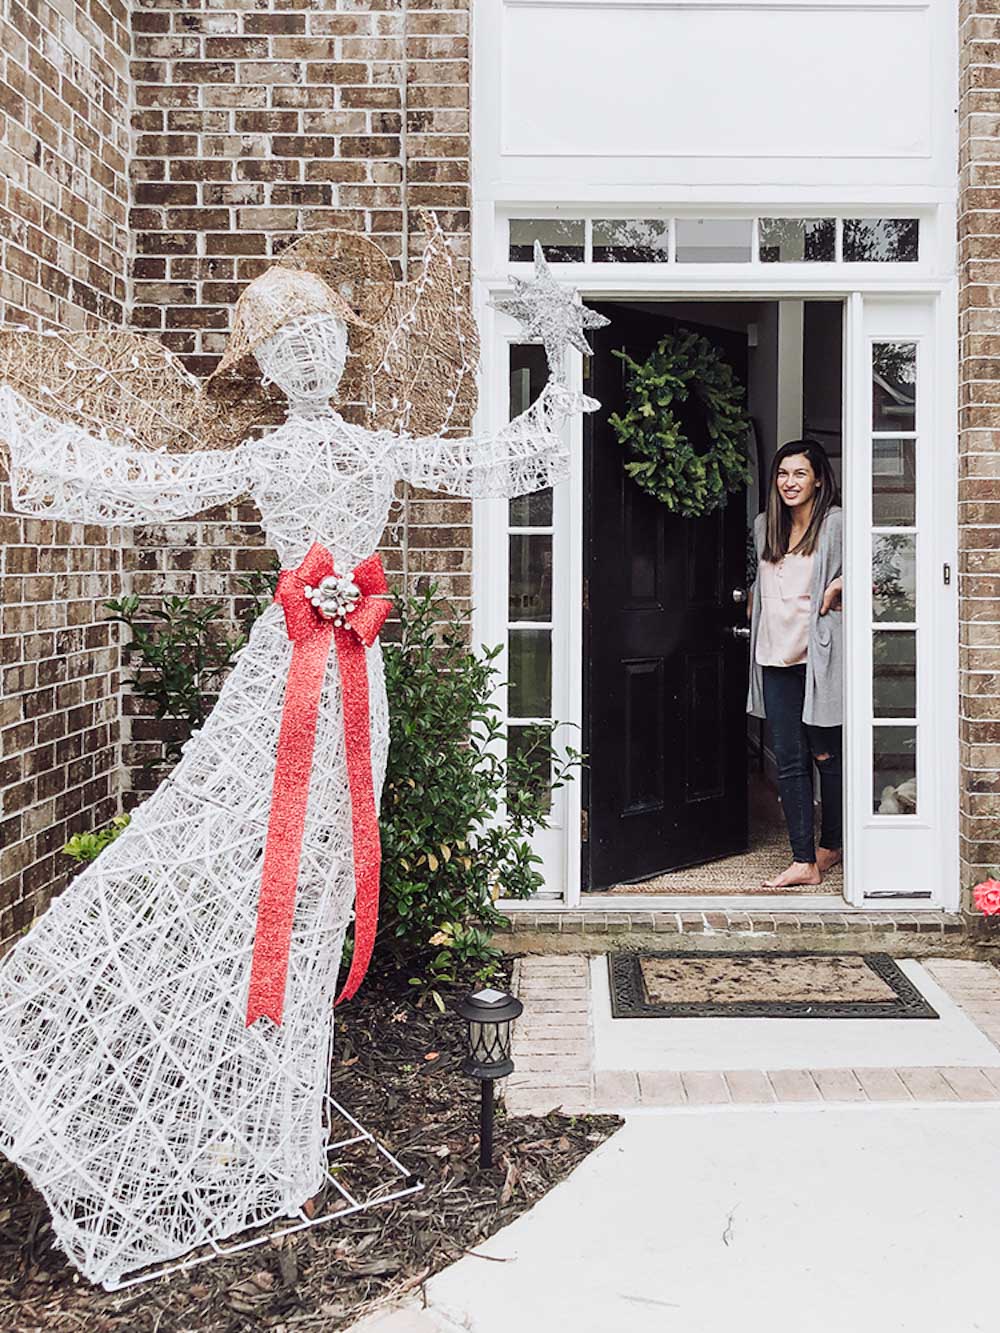 A woman looks out from her decorated front door.